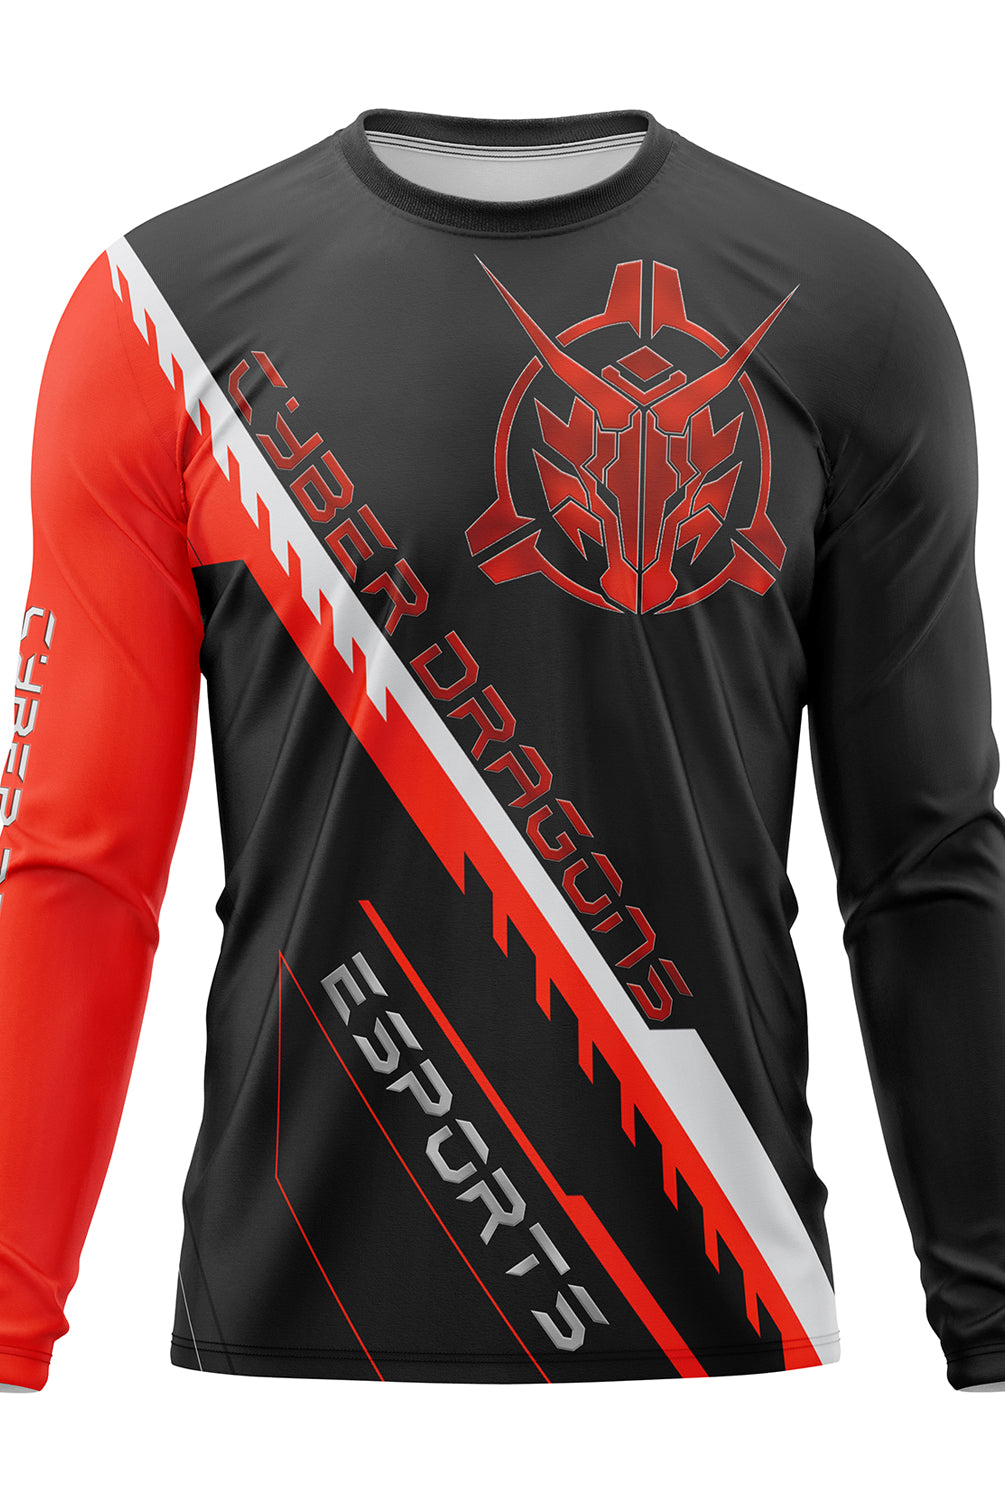 cusom sublimation long sleeve black and red